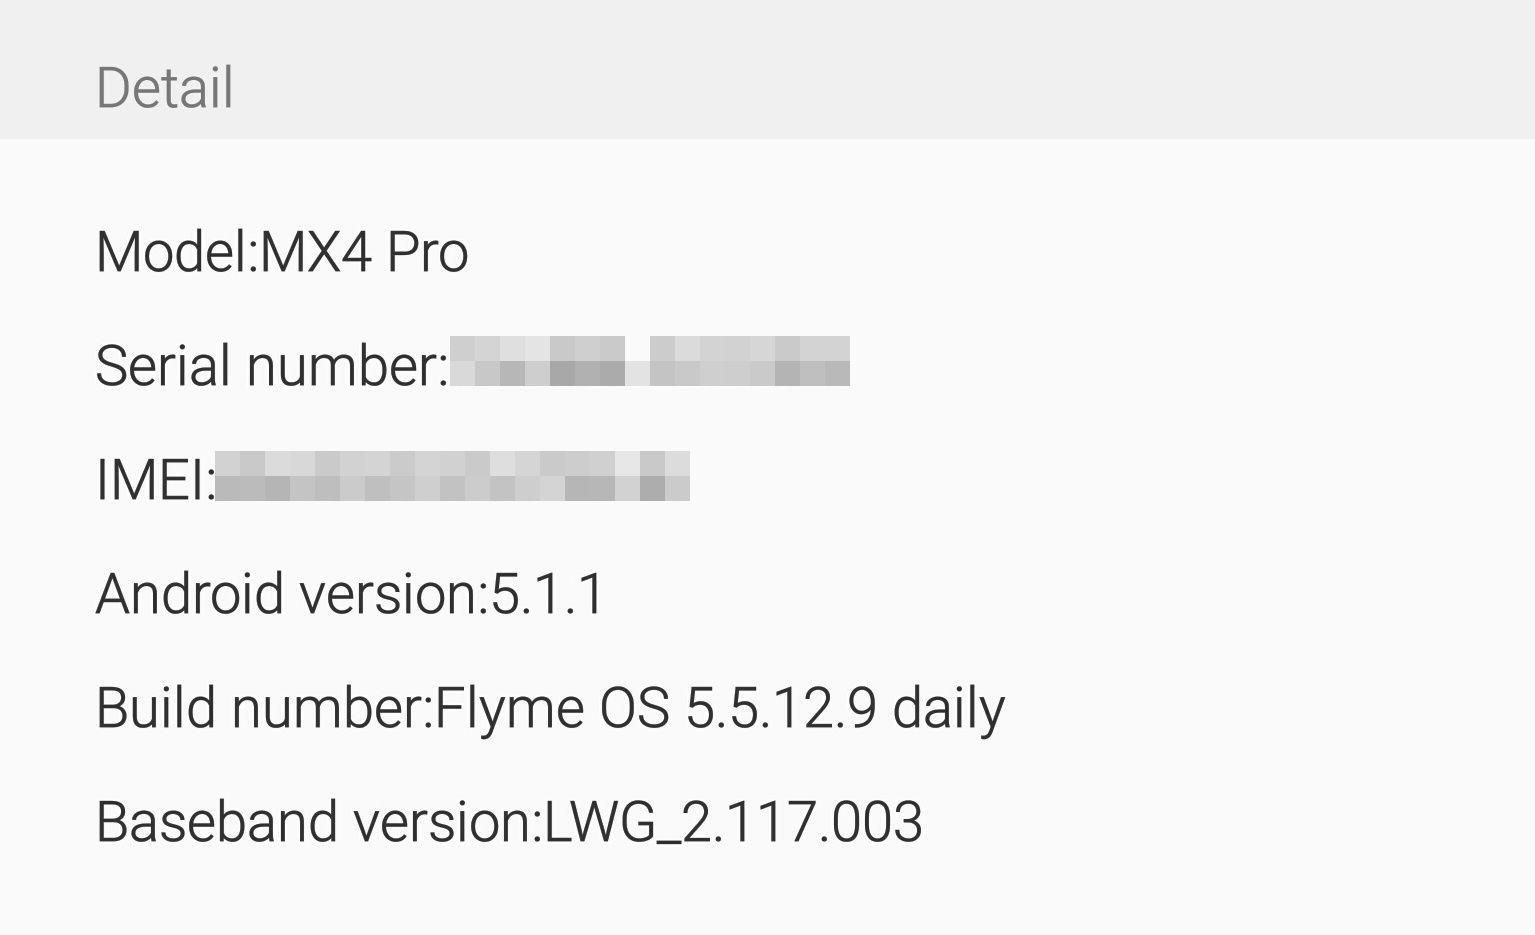 Meizu MX4 Pro用Flyme OS 5.5.12.9 dailyにてAndroid OS 5.1.1を採用